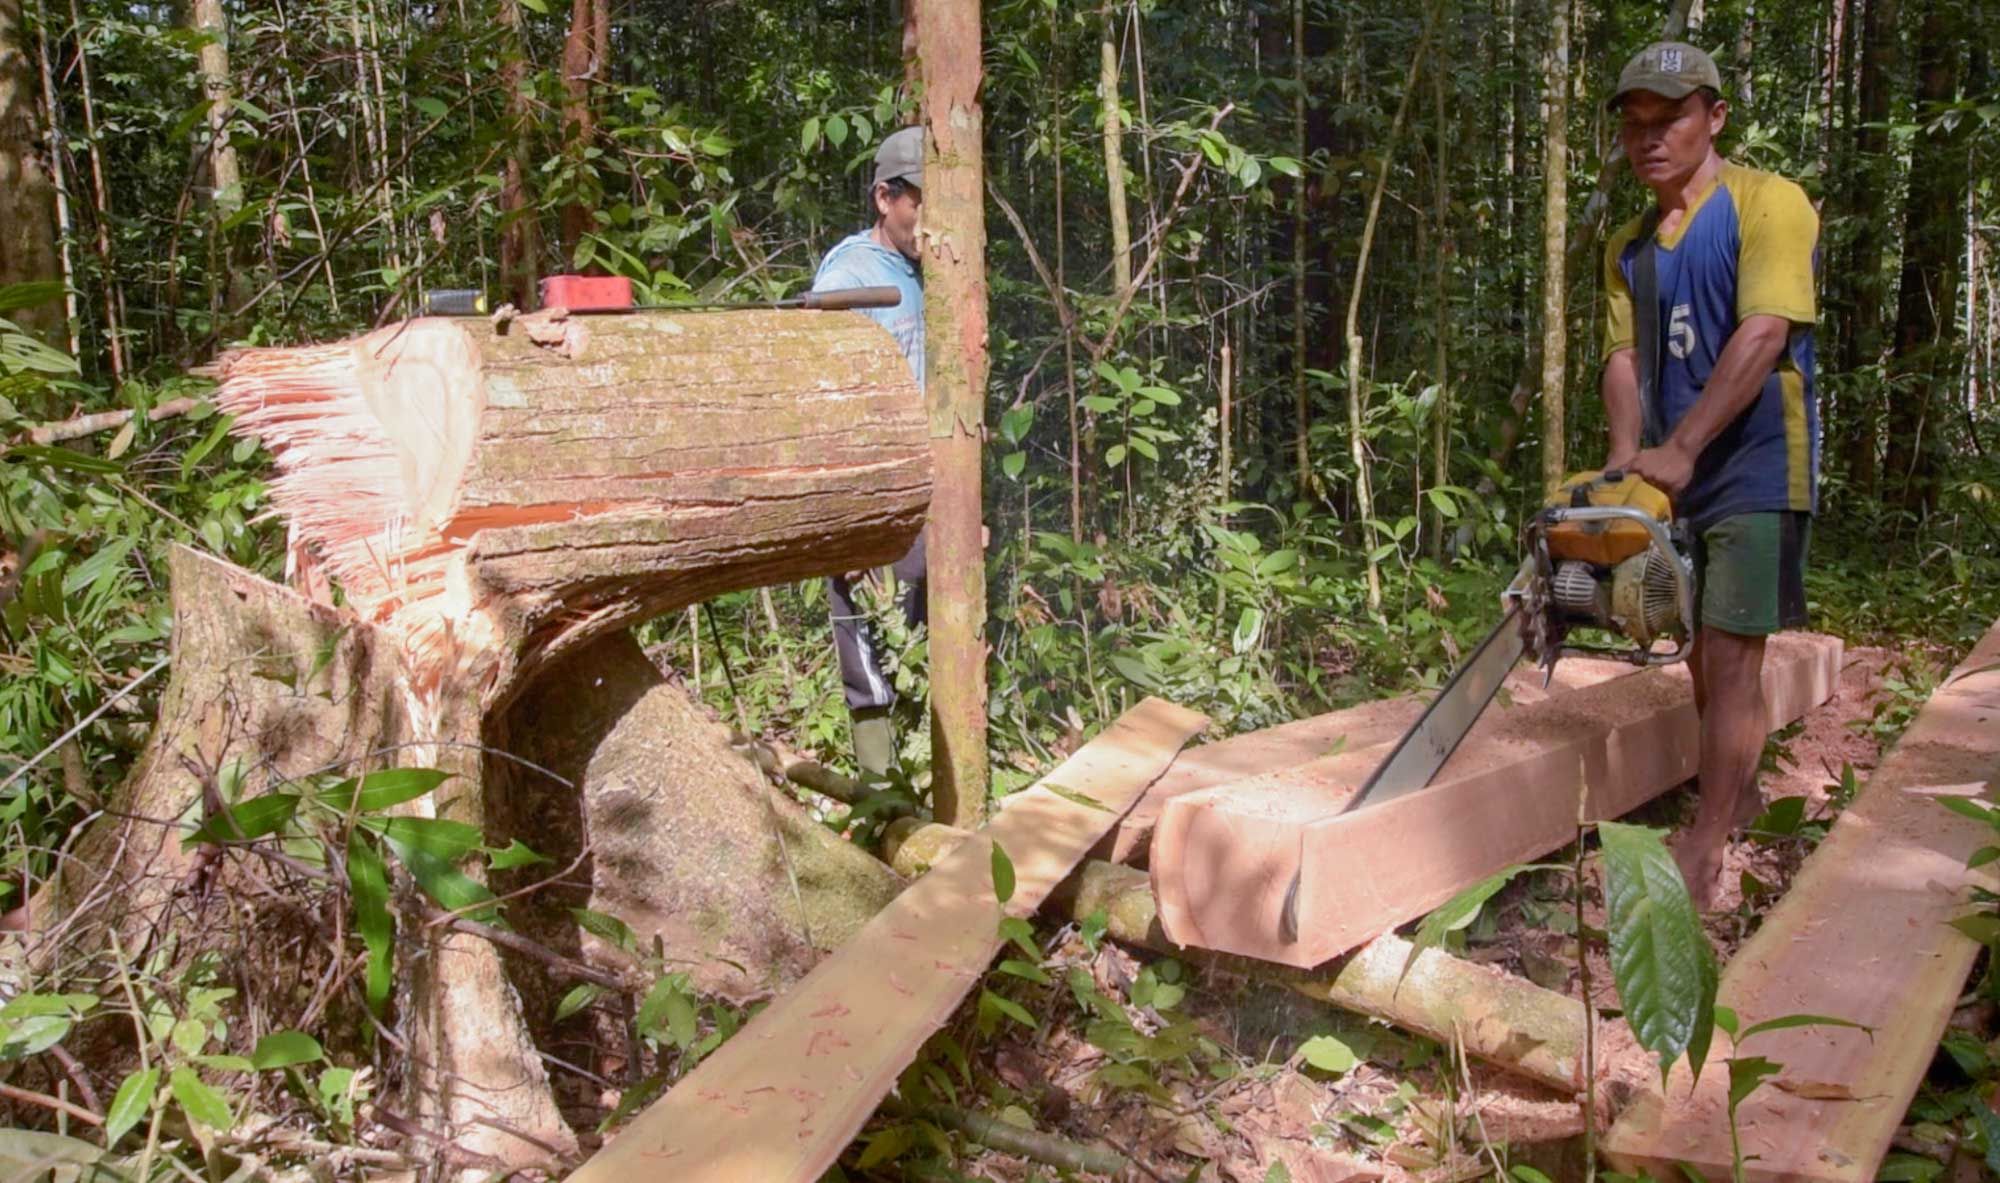 Not all logging operations obtain the proper permits. These men, who are cutting wood to rebuild their aging home, have selectively chosen only a few trees.